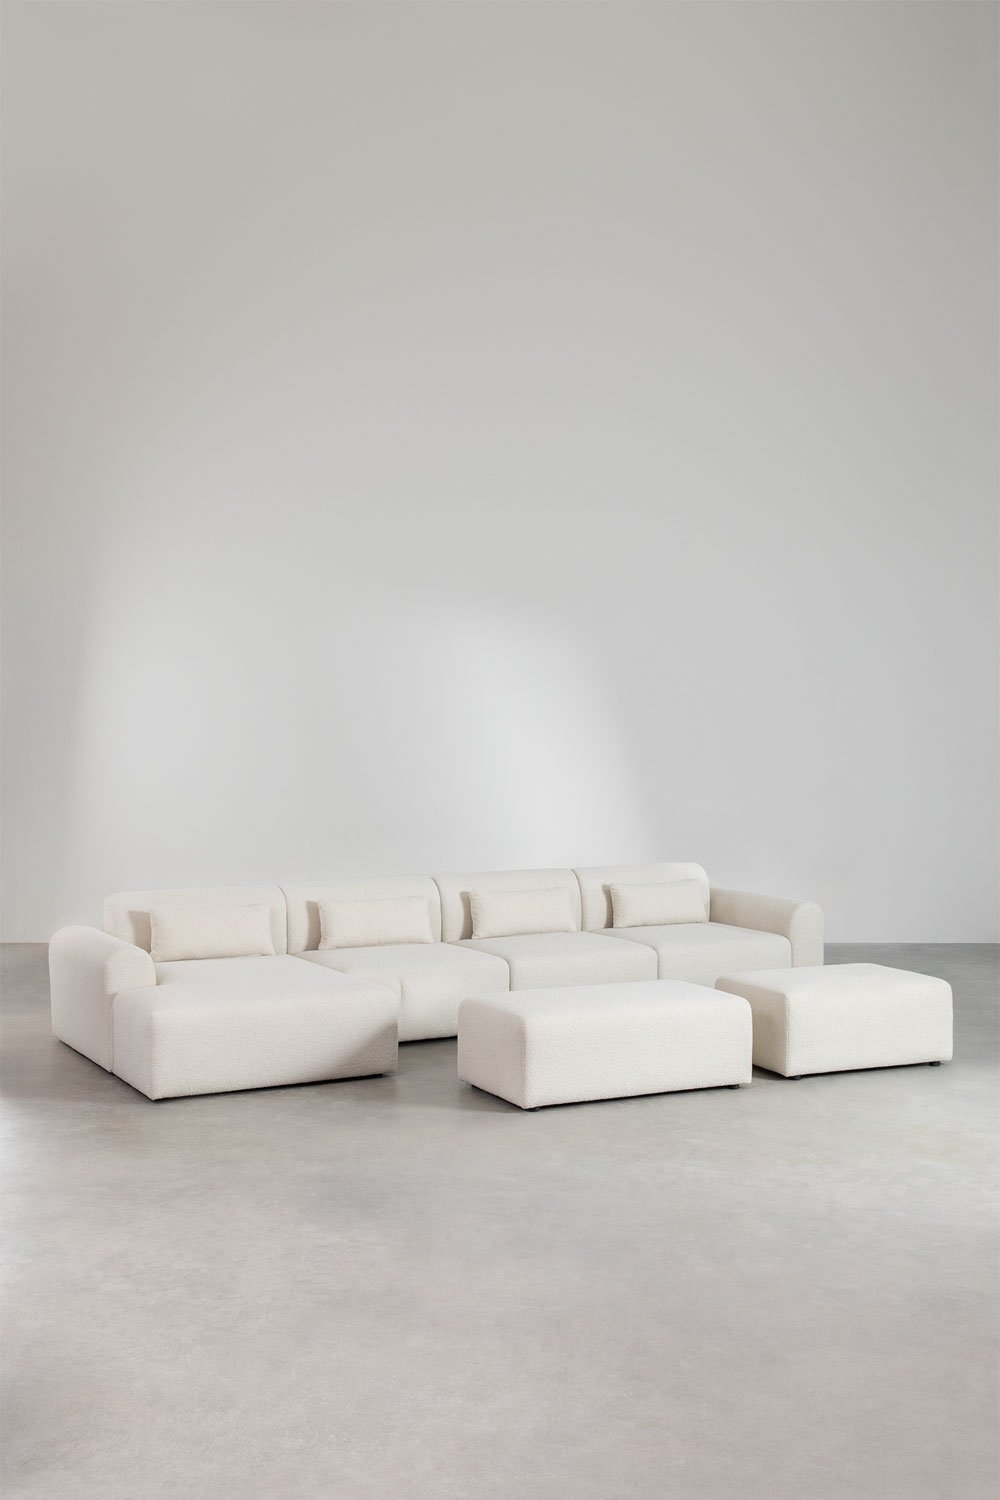 4-Piece Modular Chaise Longue Sofa with Right Corner and Pouffes in Borreguito Borjan, gallery image 1